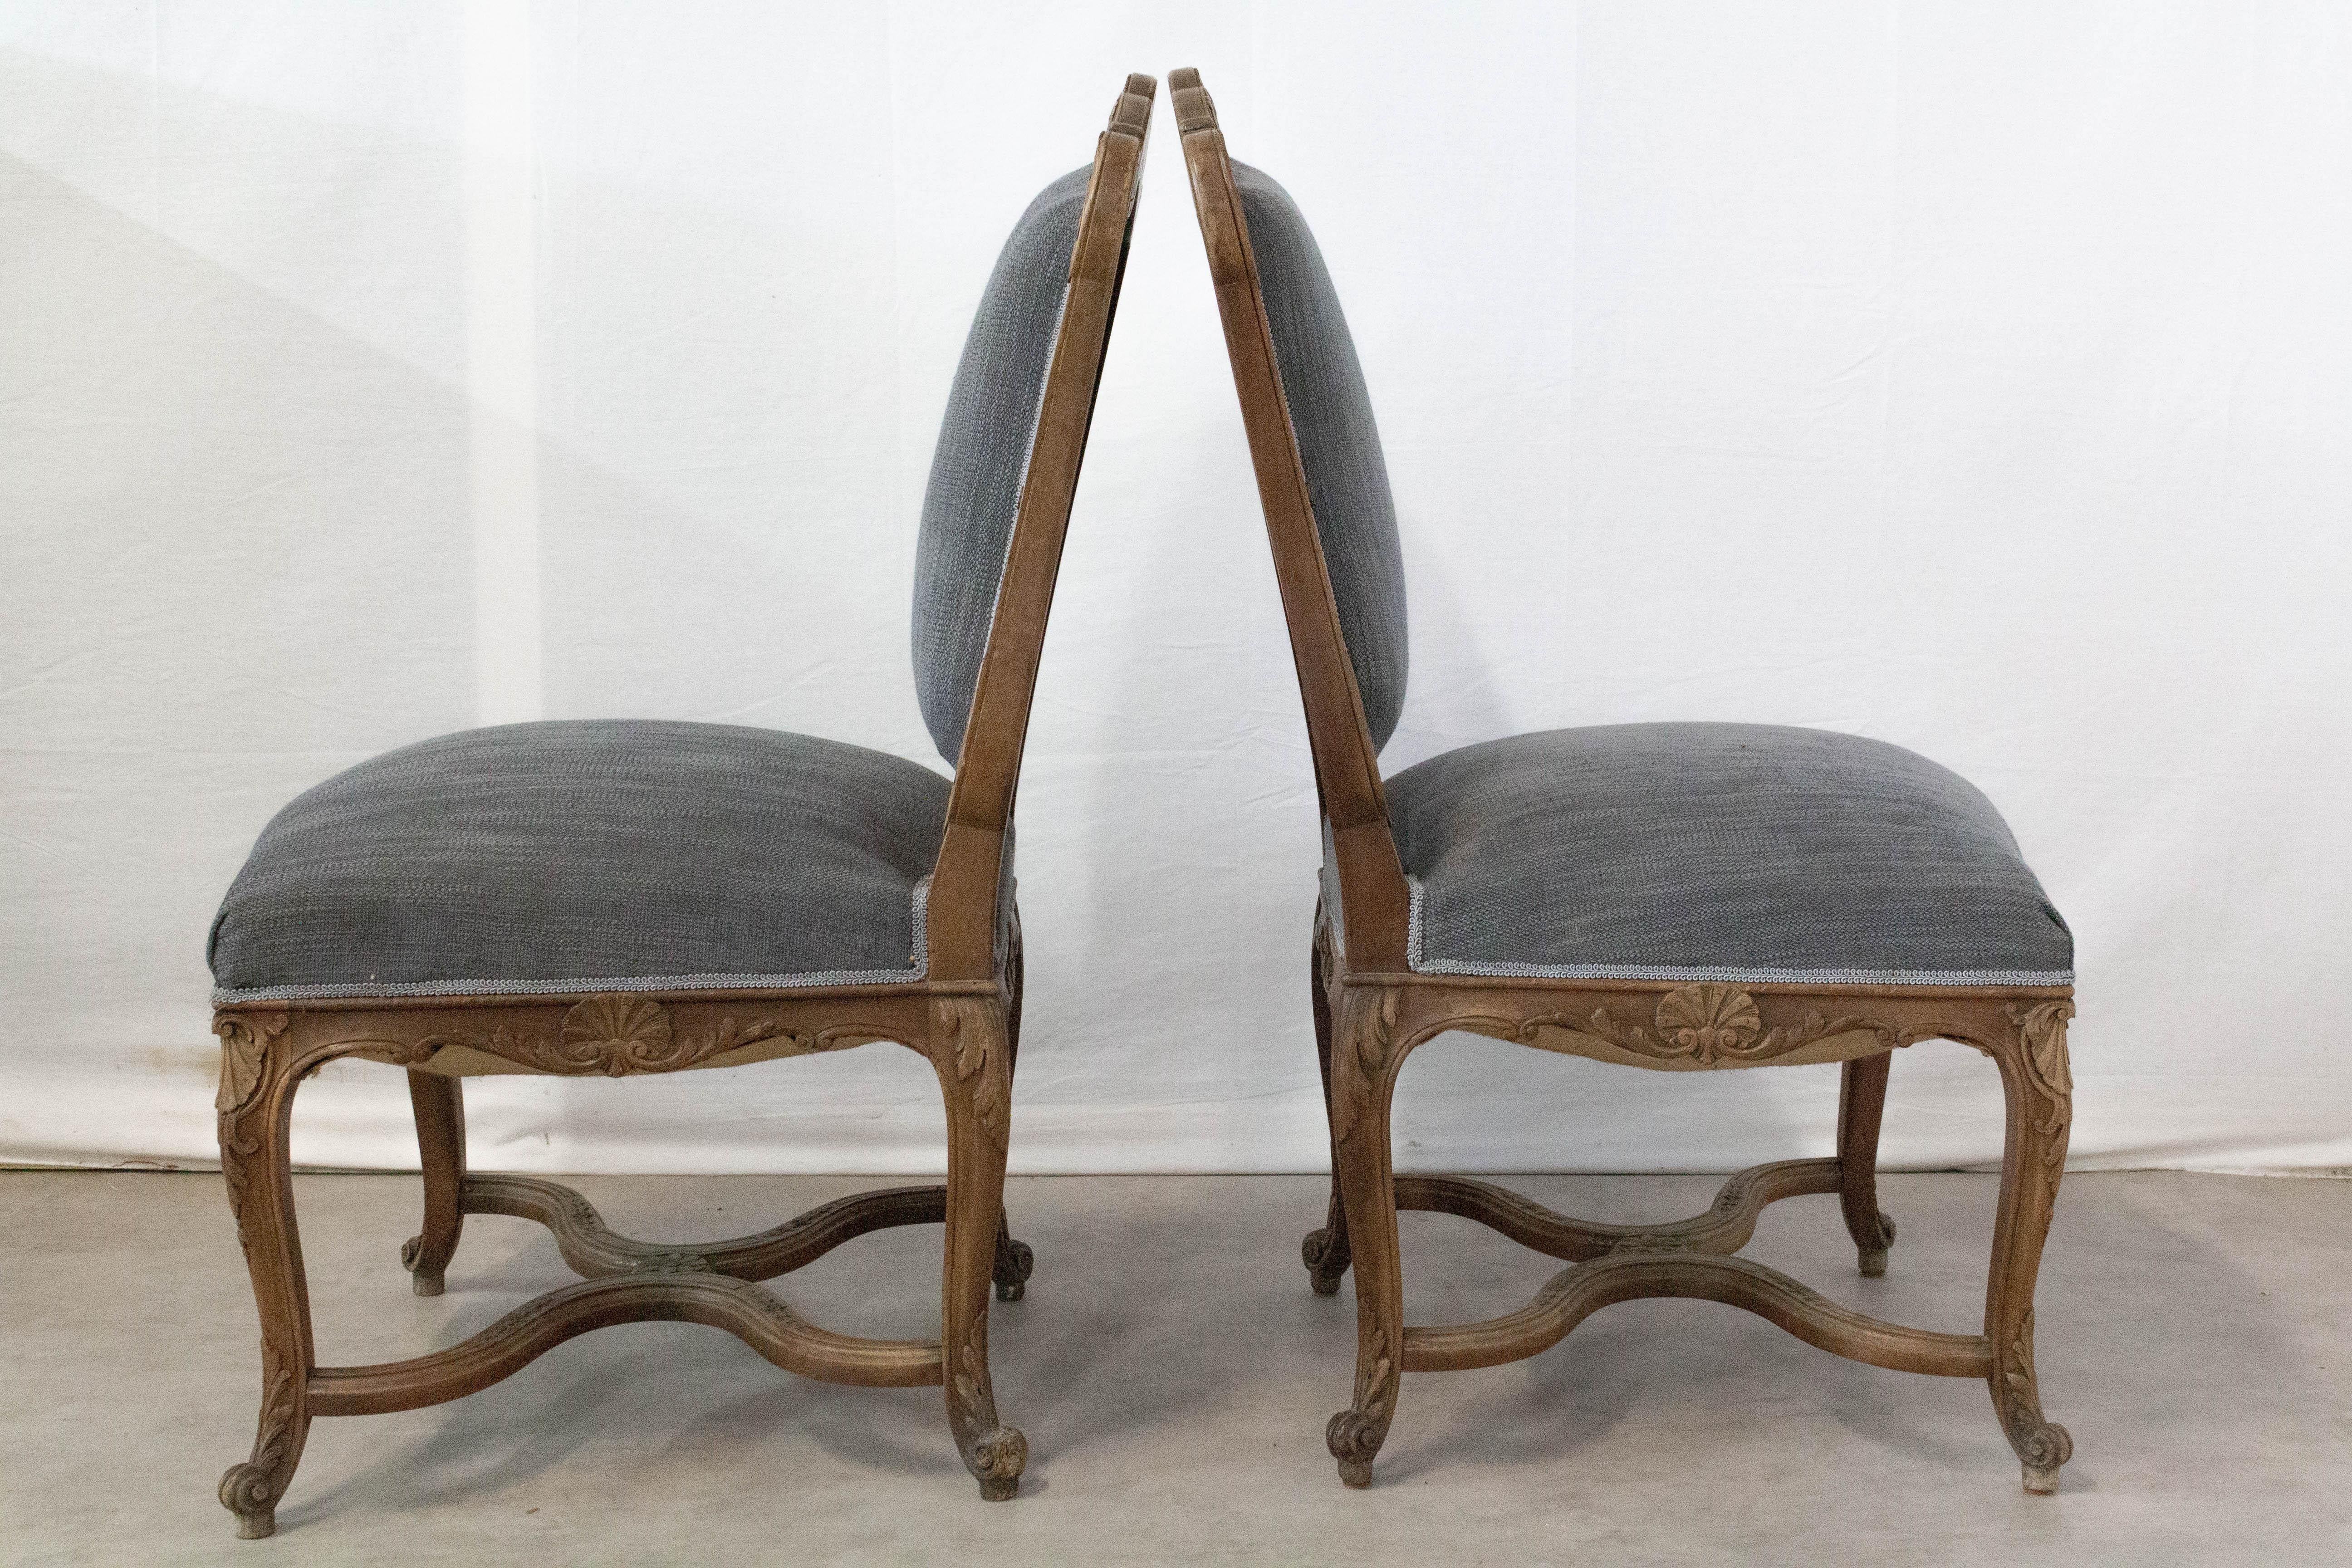 Pair of French Regency chairs or Fauteuils to be re-upholstered midcentury, Revival French Regency
French Regency is the period between Louis XIII and Louis XIV reigns
Good antique patina
It will be waxed and cleaned before shipping
Sound and